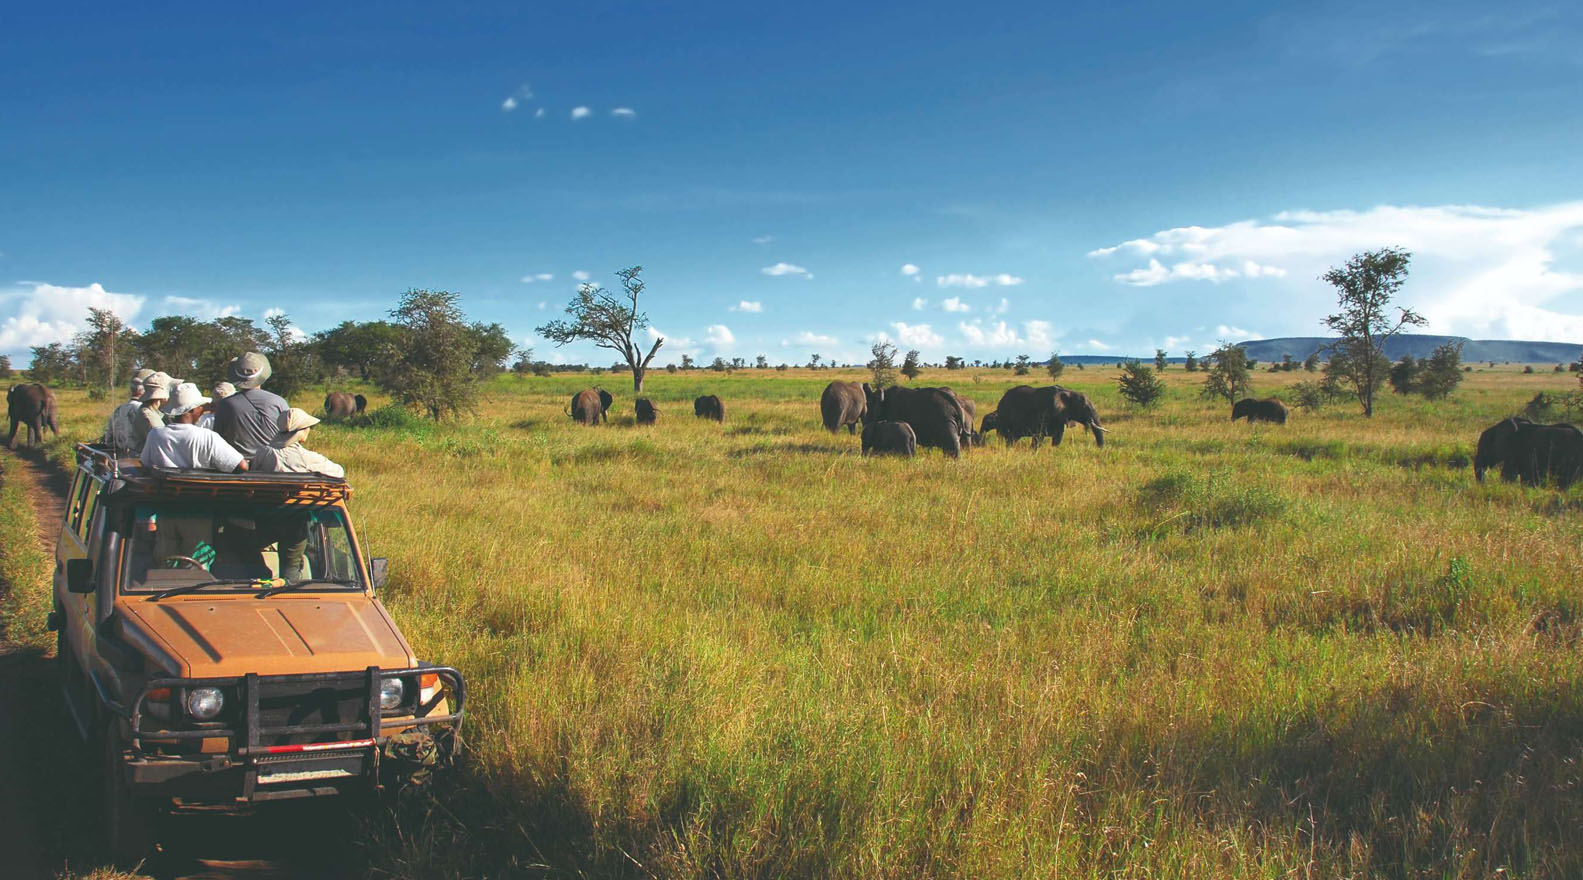 How To Get To Serengeti National Park